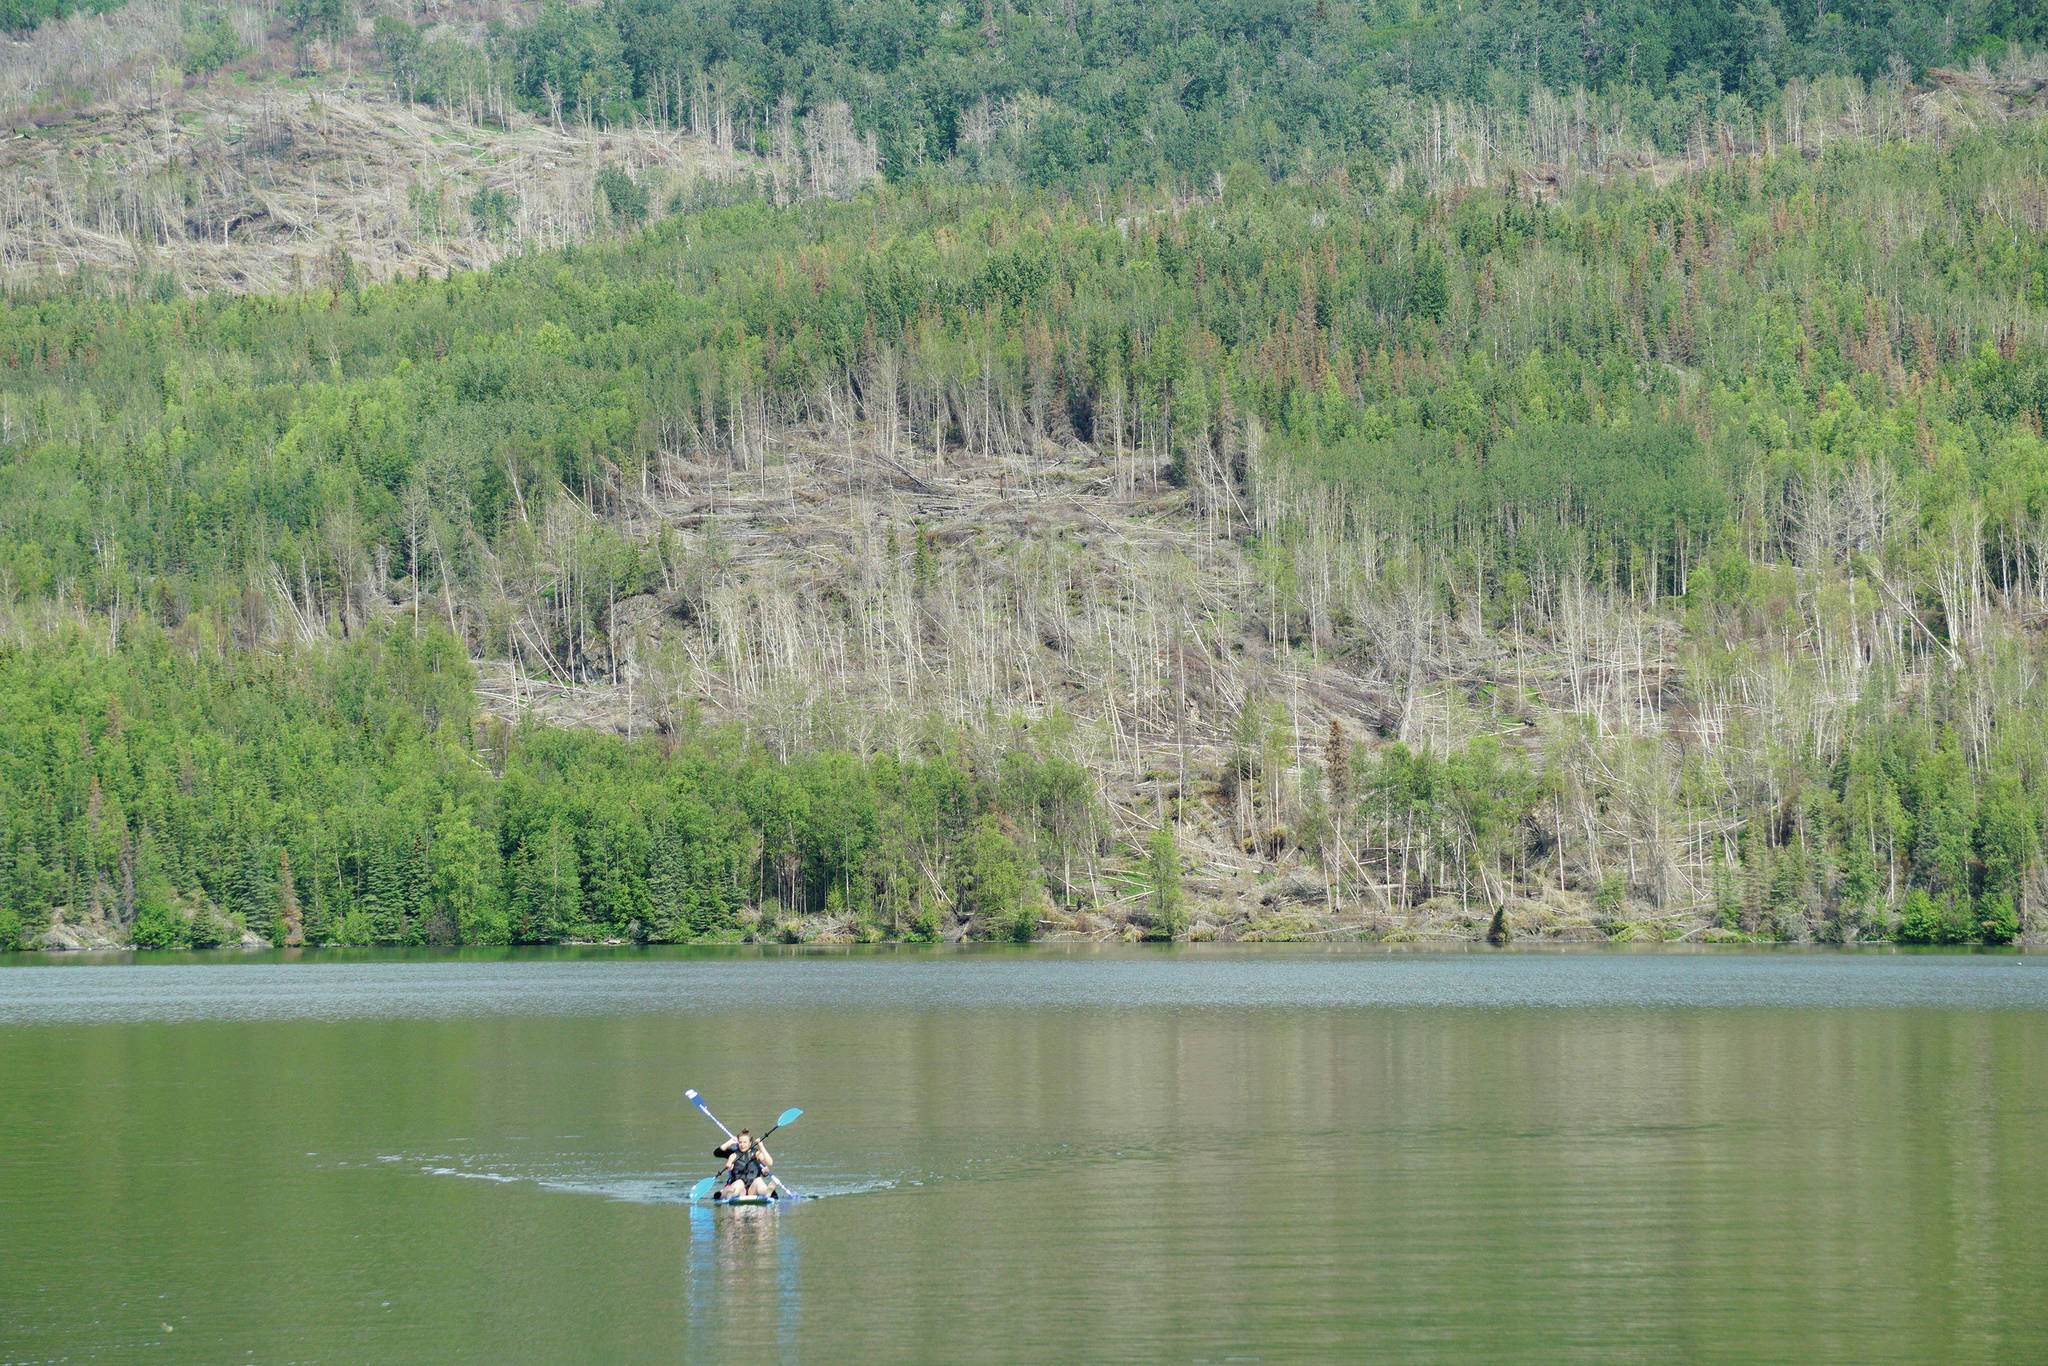 Two women paddle a stand-up paddleboard across Hidden Lake in the Kenai National Wildlife Refuge on July 18, 2020, near Sterling, Alaska. The fallen stands of trees are from the 2019 Swan Lake Fire. (Photo by Michael Armstrong/Homer News)